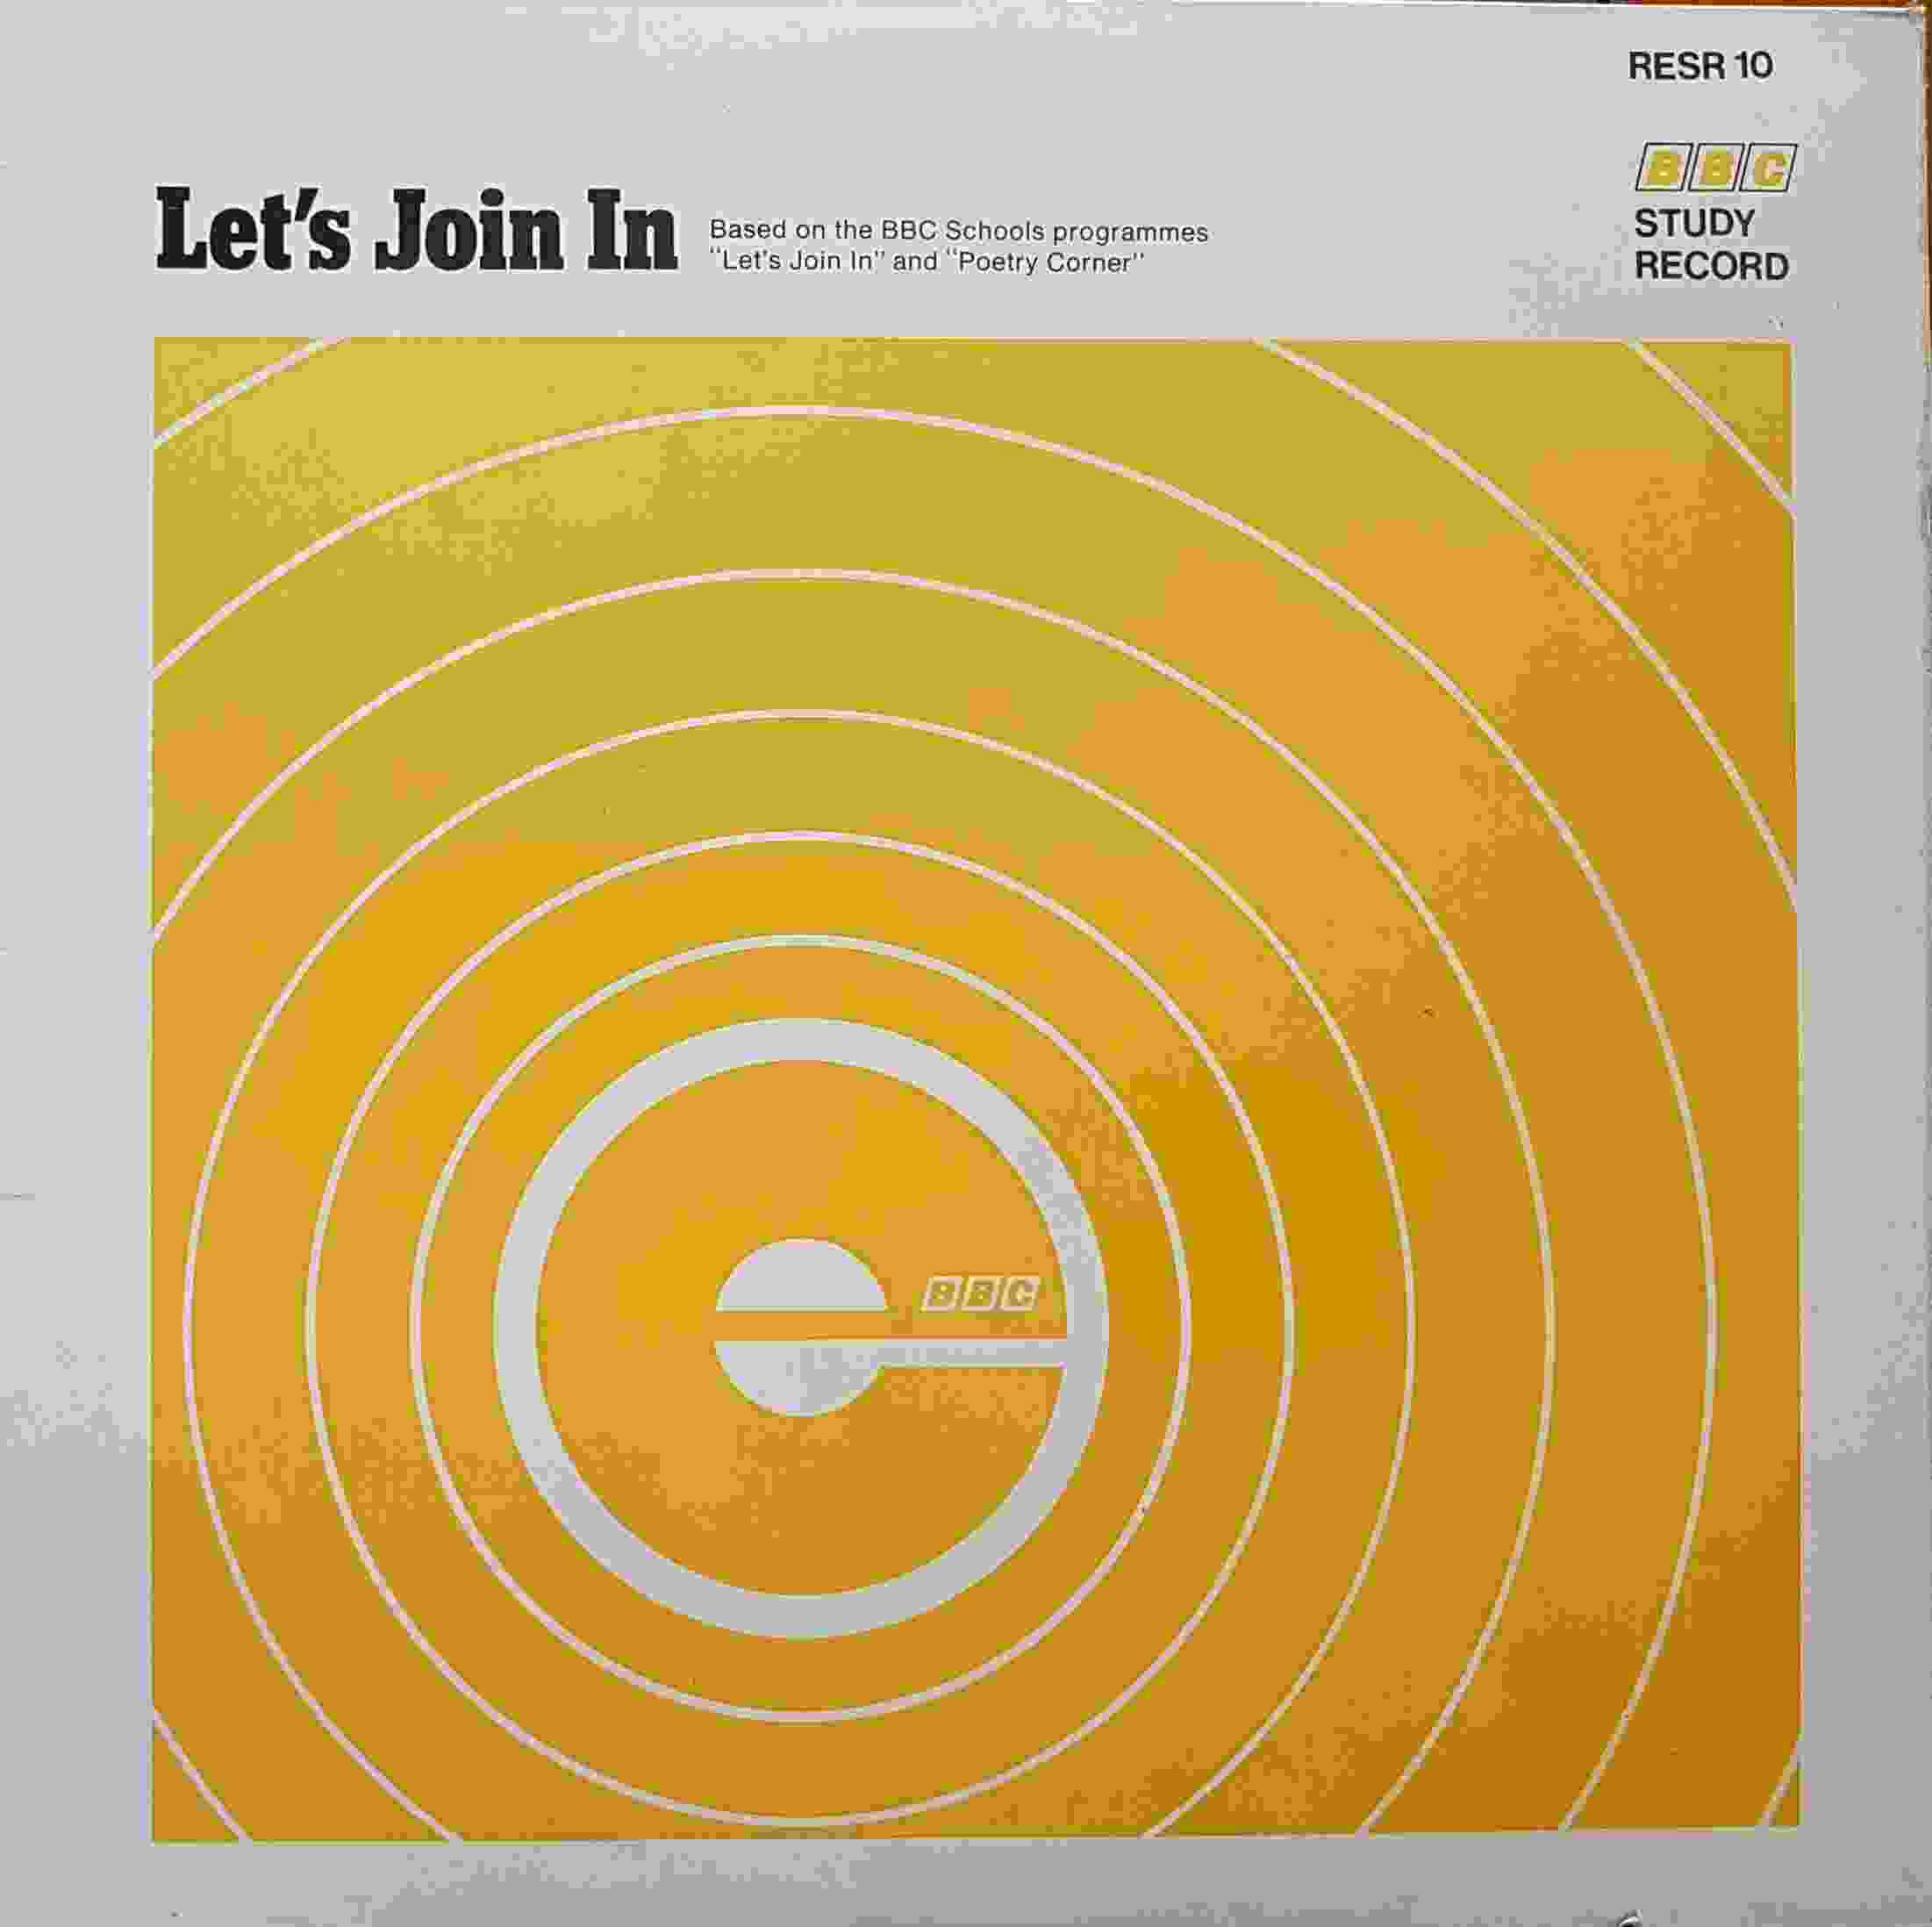 Picture of Let's join in by artist Various from the BBC albums - Records and Tapes library